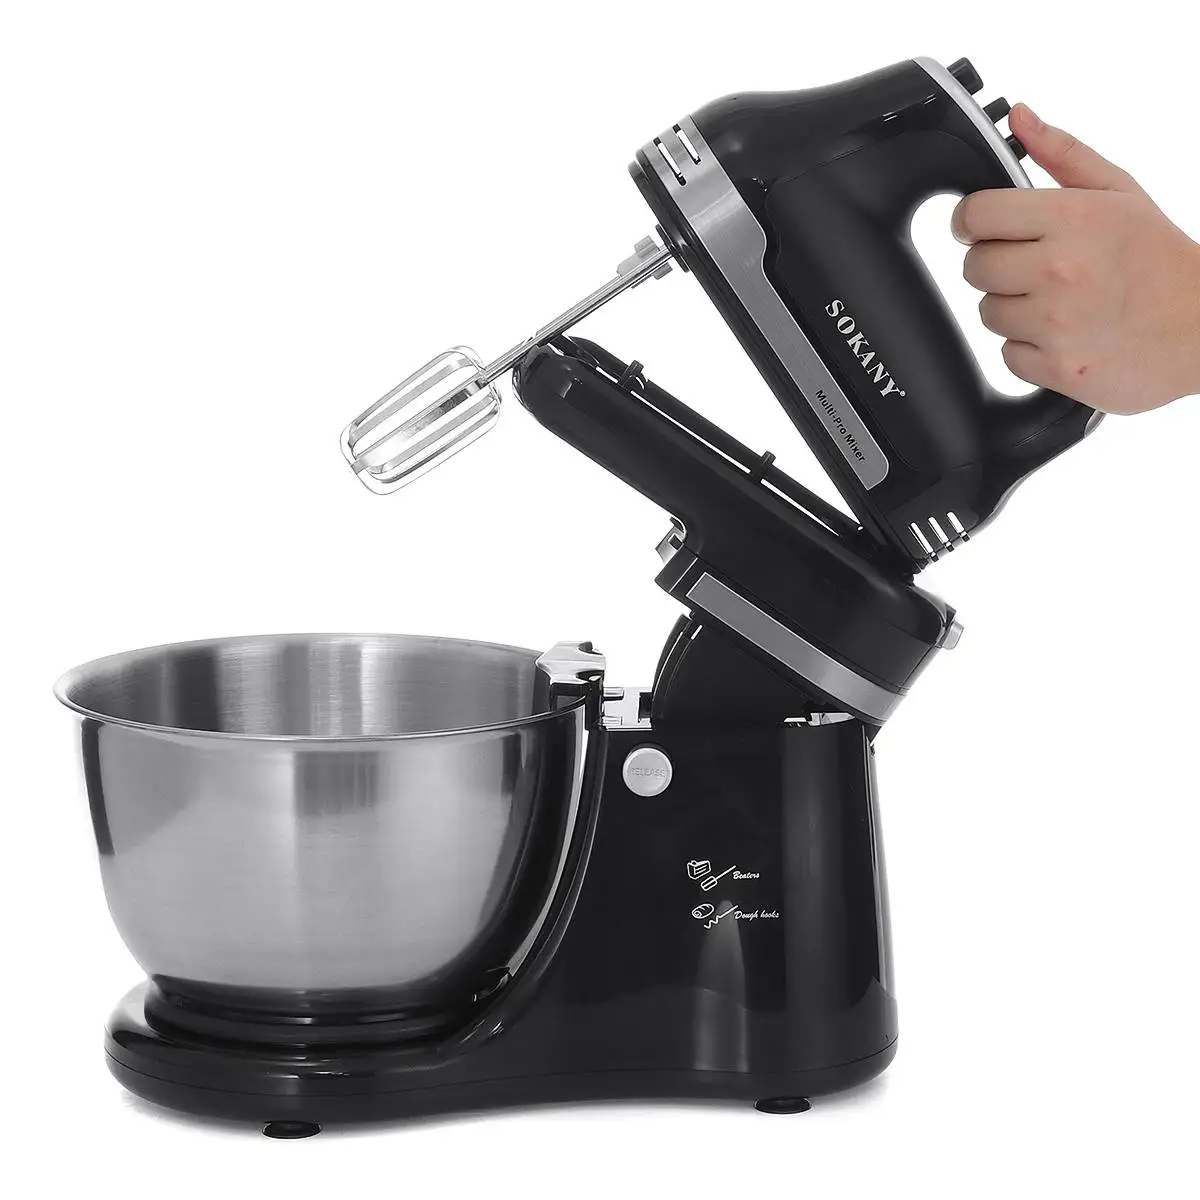 

5 speed Kitchen Food Mixers 4.2L Stand Mixer Stainless Steel Bowl Blender Cream Egg Whisk Whip Dough Kneading Mixer Bread Maker